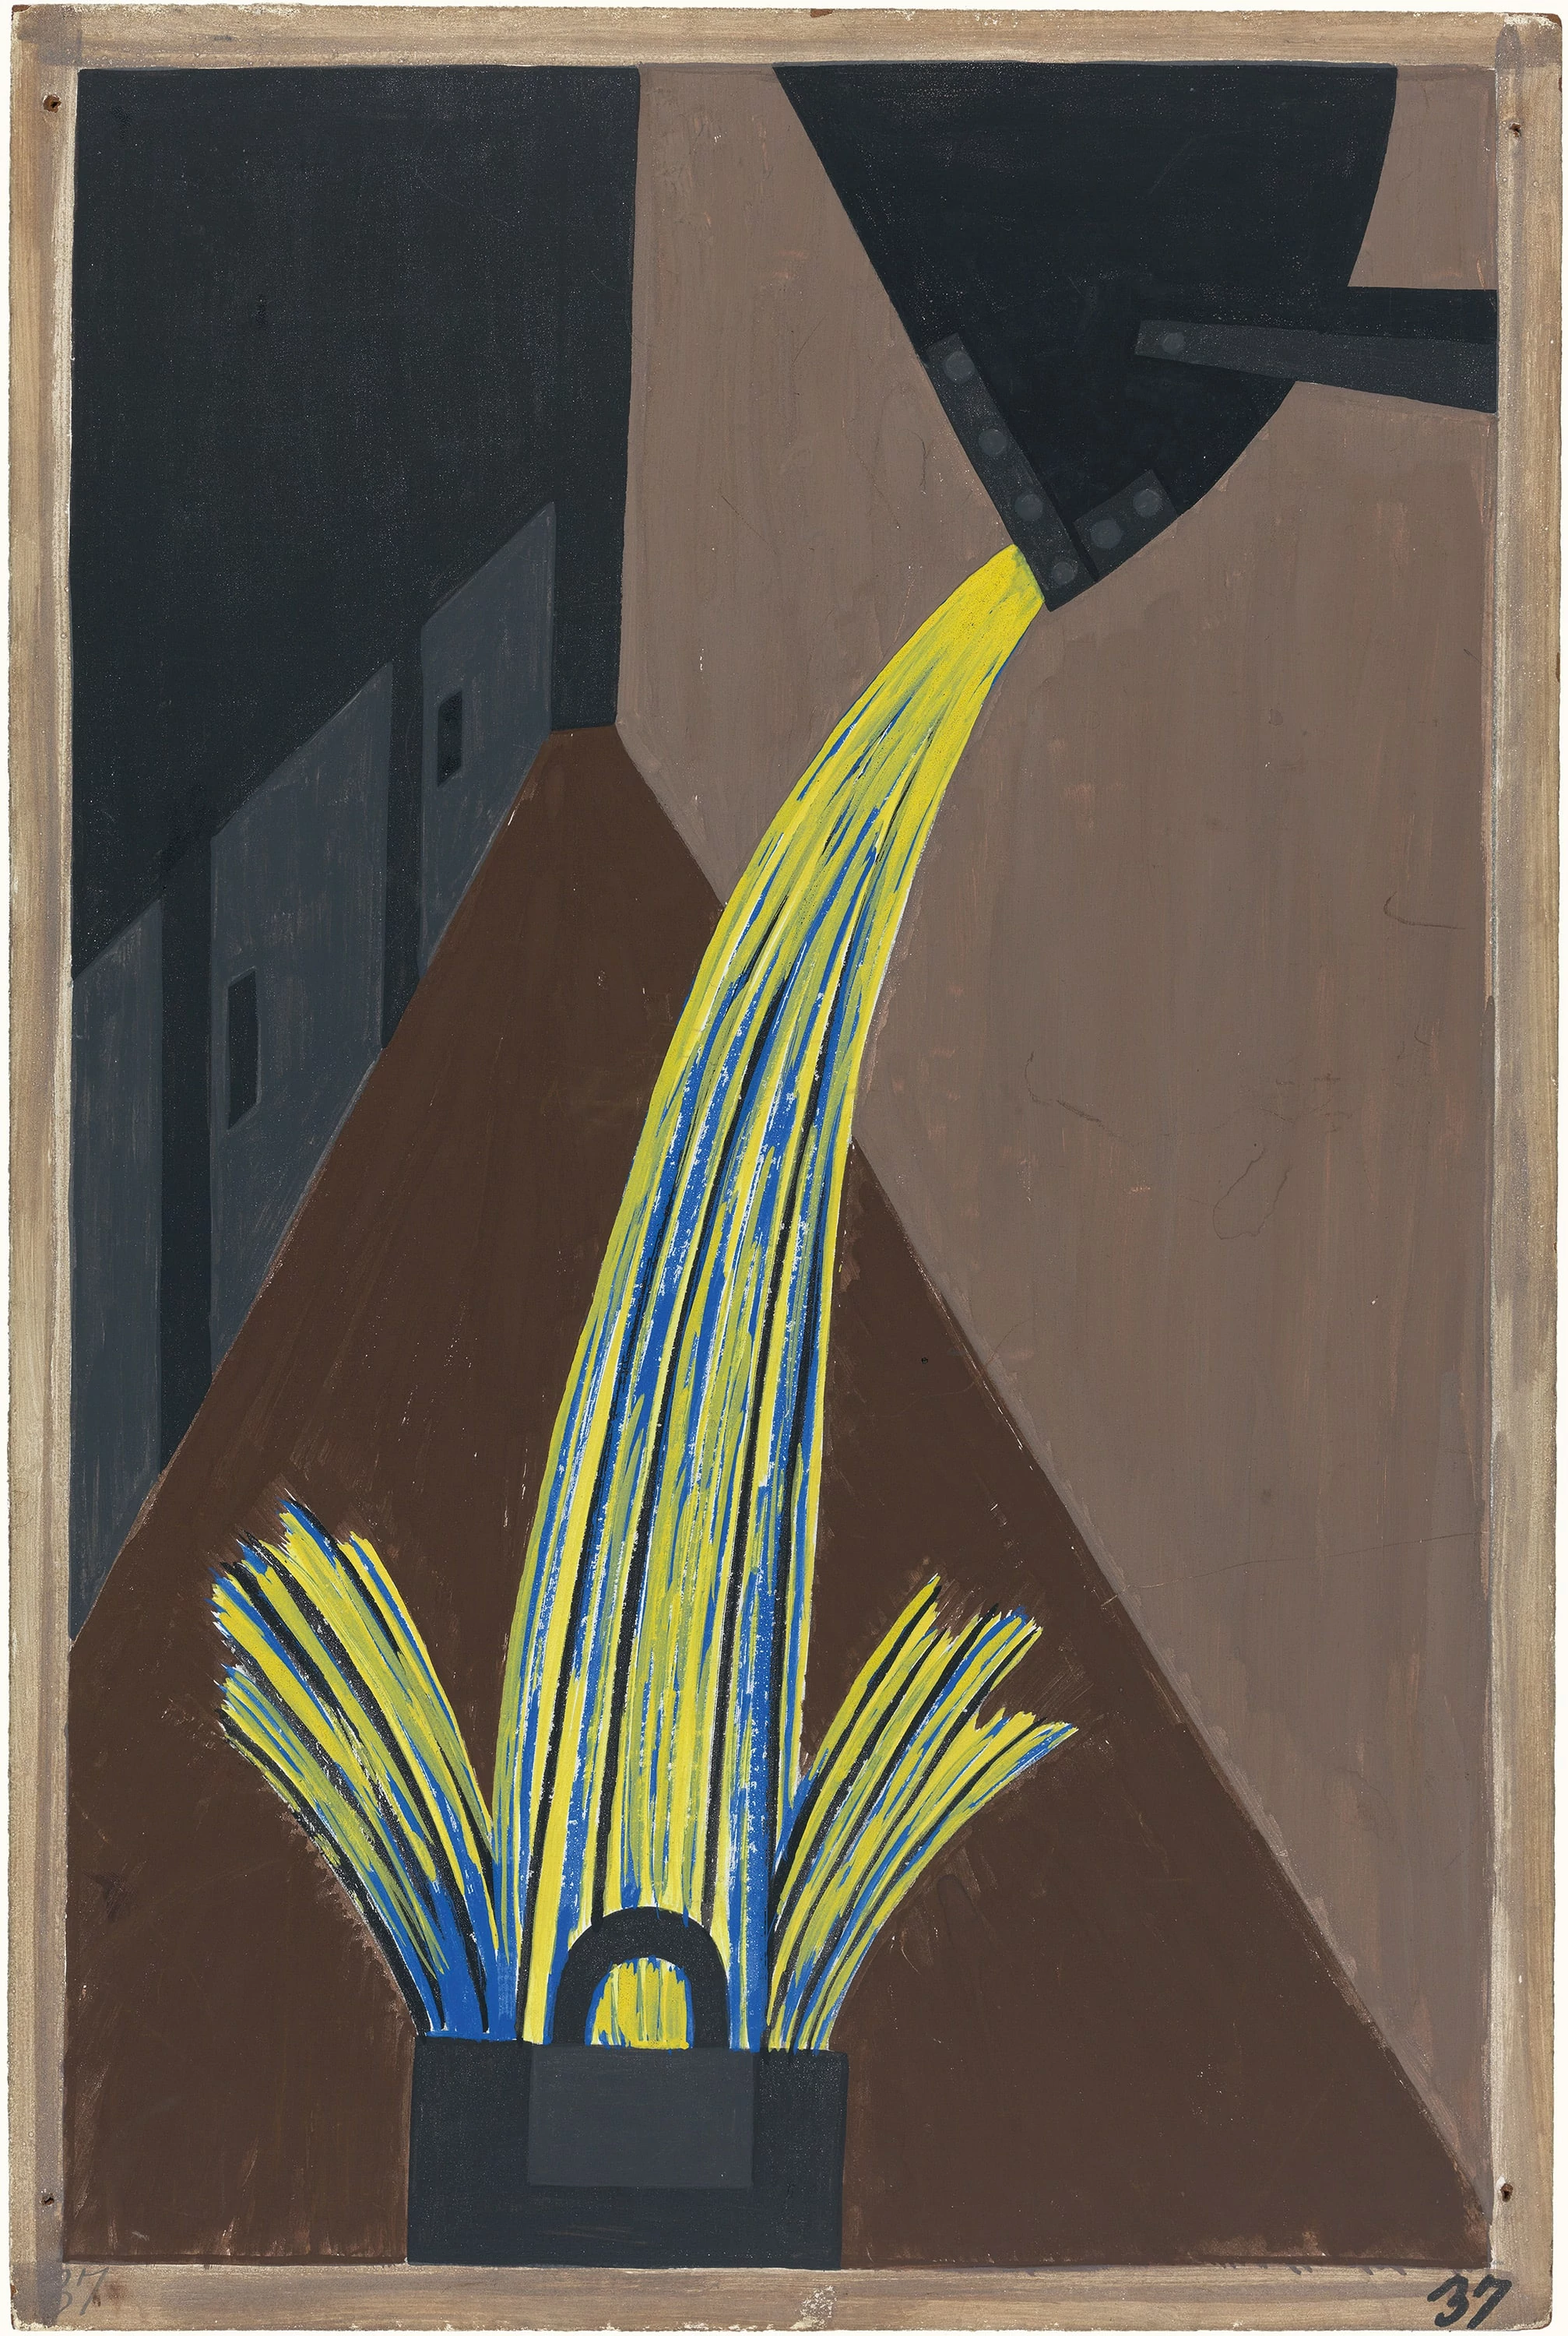 Migration Series No.37: Many migrants found work in the steel industry, Jacob Lawrence